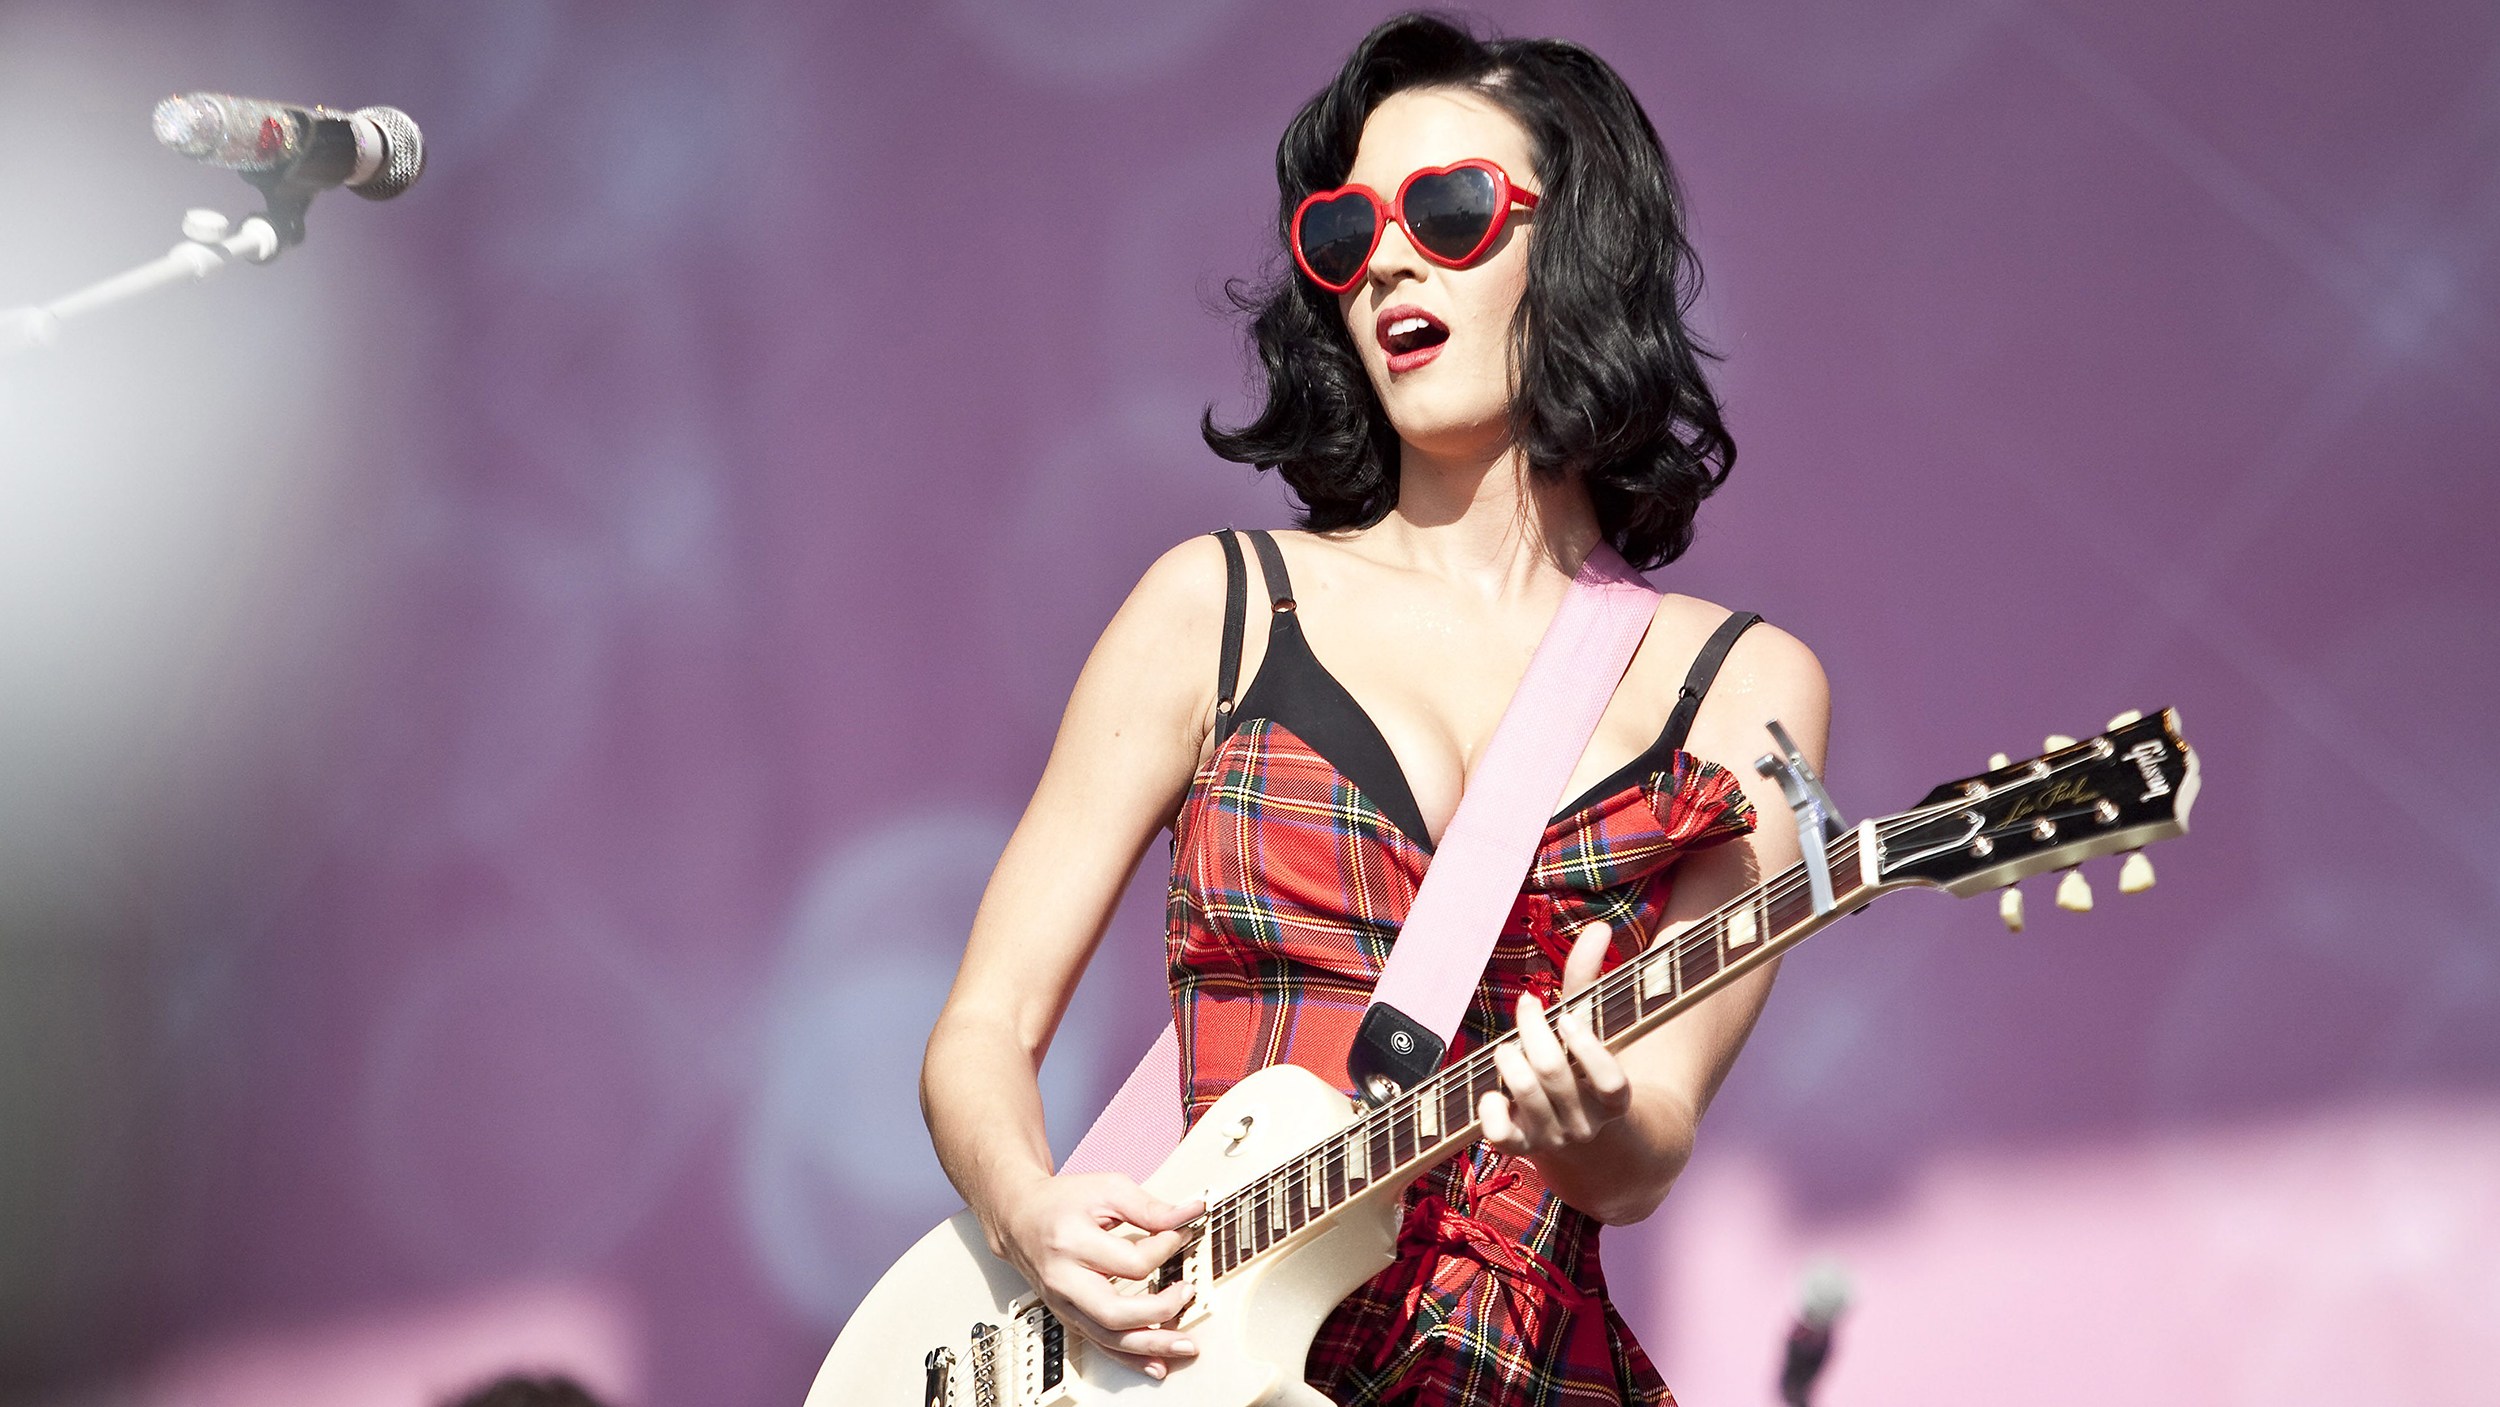 KINROSS, UNITED KINGDOM - JULY 11:  Katy Perry performs on stage during day 2 of T in the Park music festival on July 11, 2009 in Kinross, Scotland.  (Photo by Brian Sweeney/Getty Images)